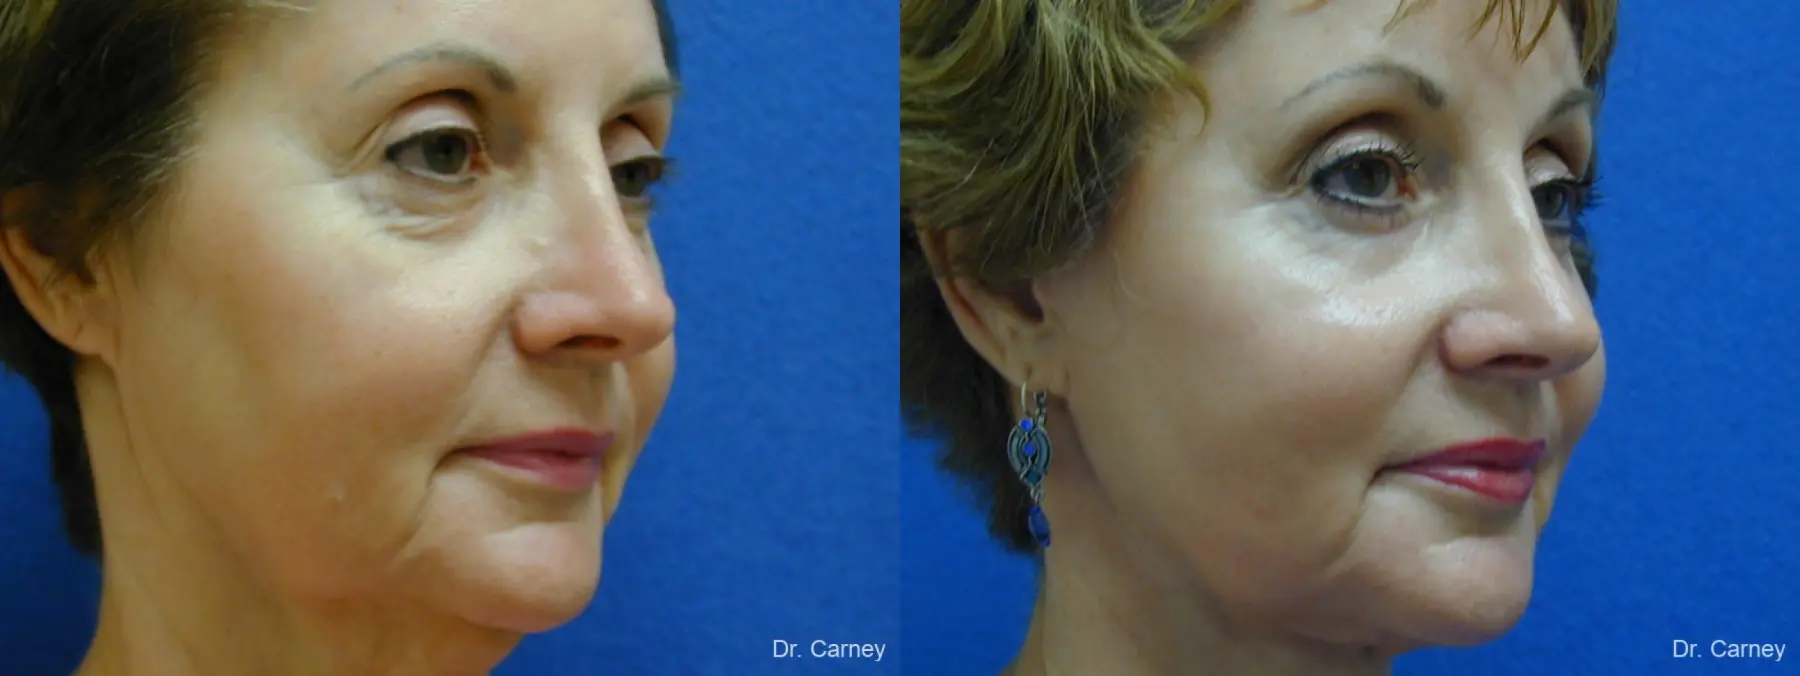 Virginia Beach Brow Lift 1216 - Before and After